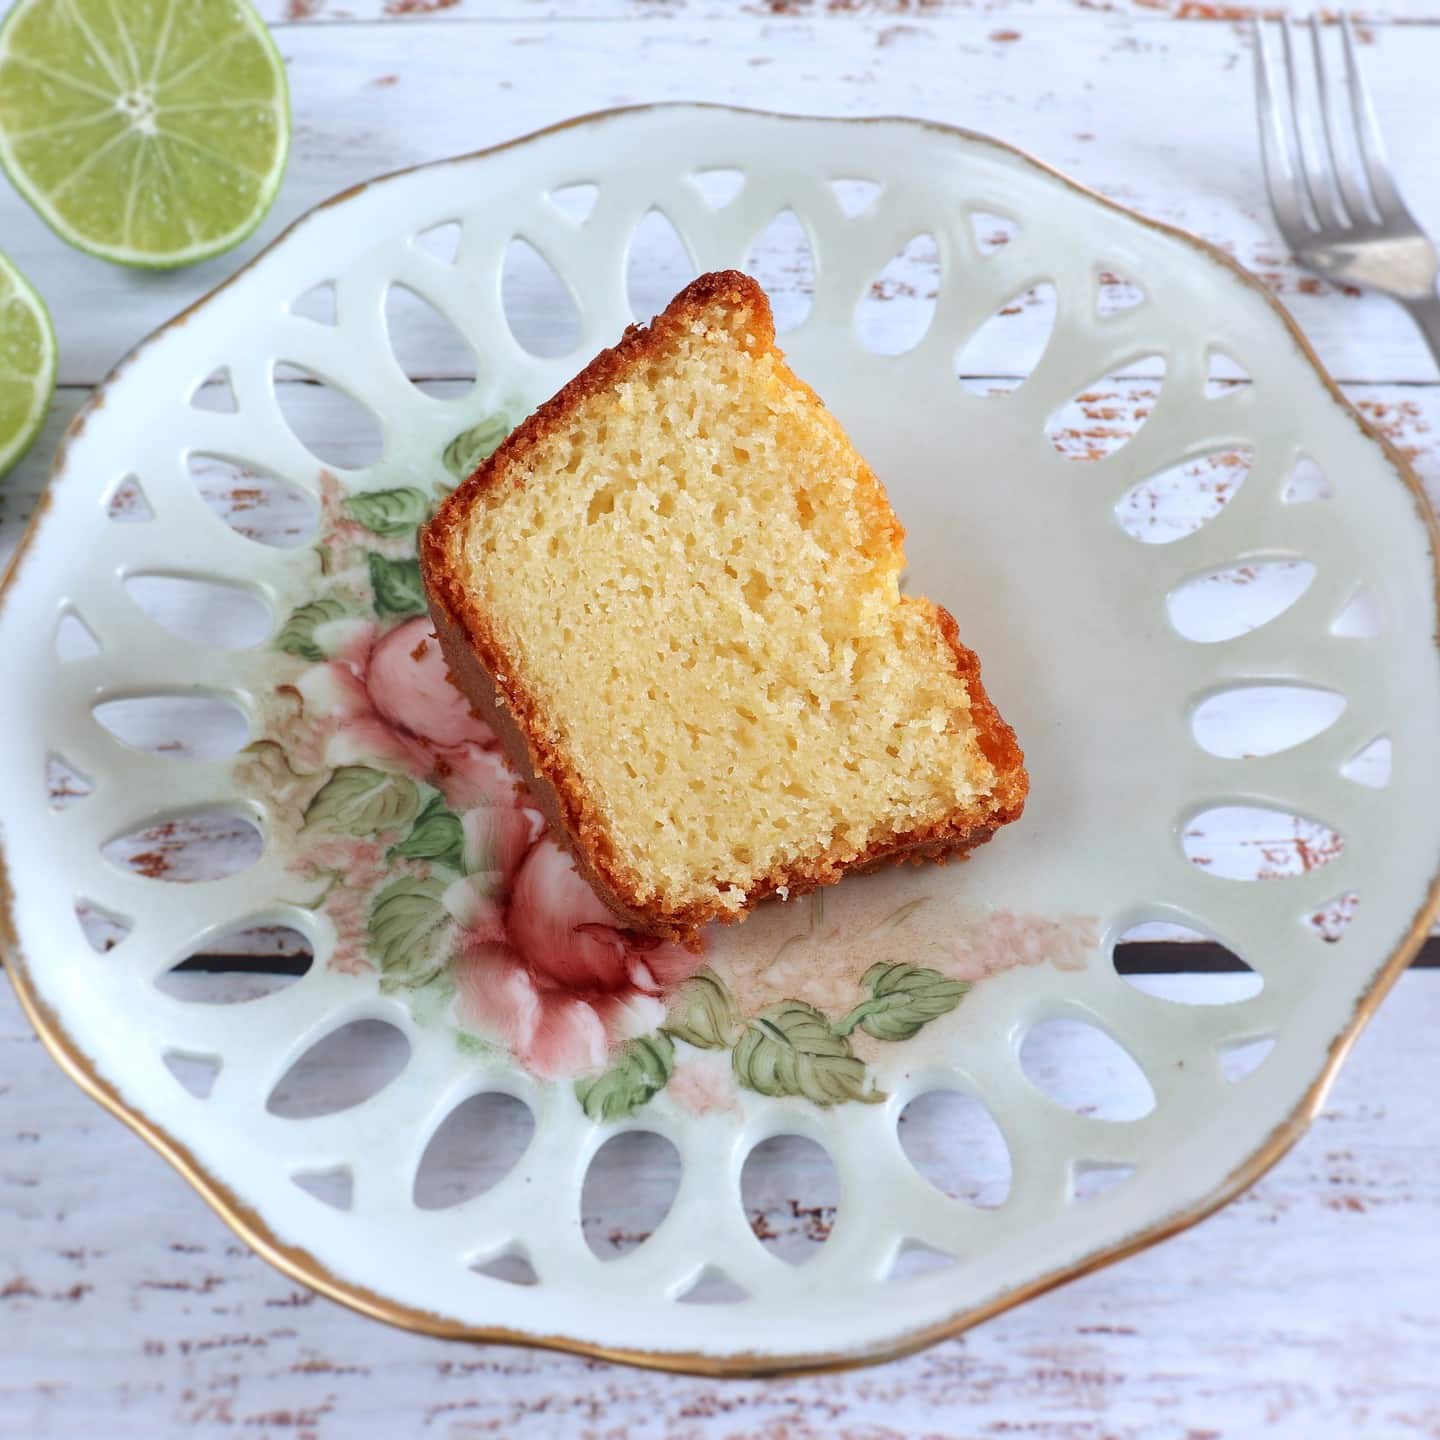 Lime yogurt cake | Food From Portugal

Do you like simple and homemade cakes? This delicious lime yogurt cake is fluffy, has few ingredients and is very simple to prepare. It's perfect for any occasion! Bon appetit!!!

Recipe: https://www.foodfromportugal.com/recipes/lime-yogurt-cake/

#food #easy #easyrecipes #instafood #recipe #recipes #homemade #cake #lime #limecake #yogurt #yogurtcake